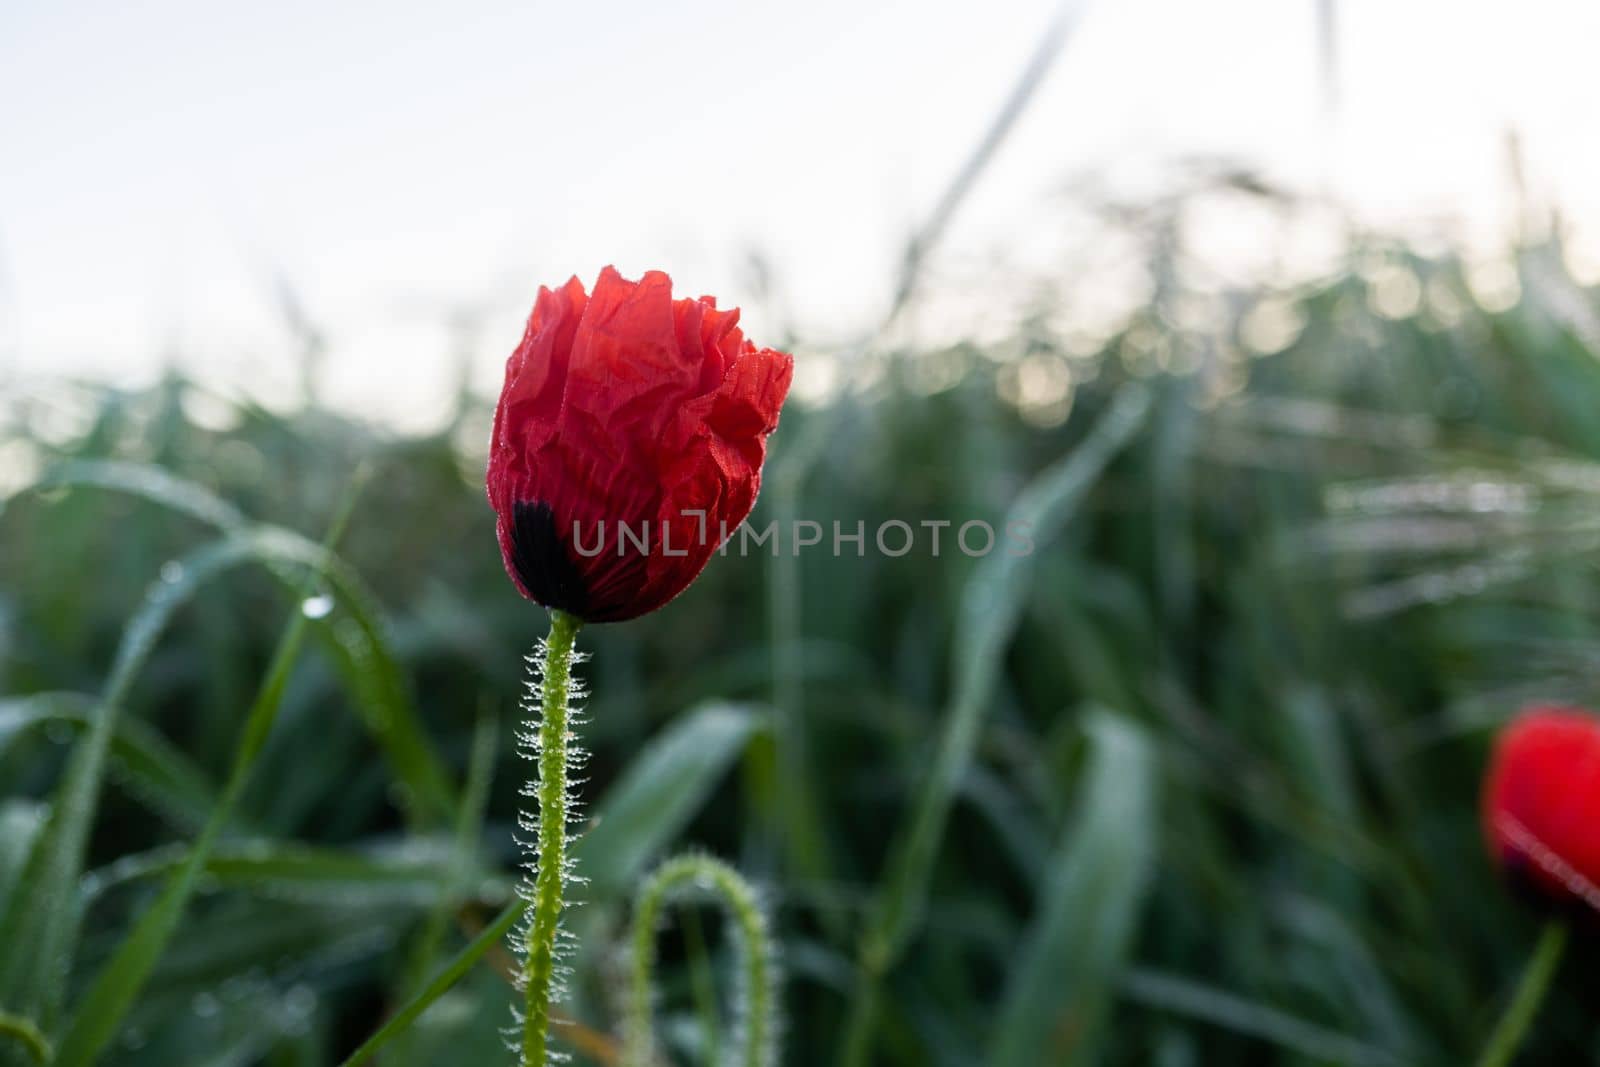 close-up of a solitary red poppy in an out-of-focus green field in the background